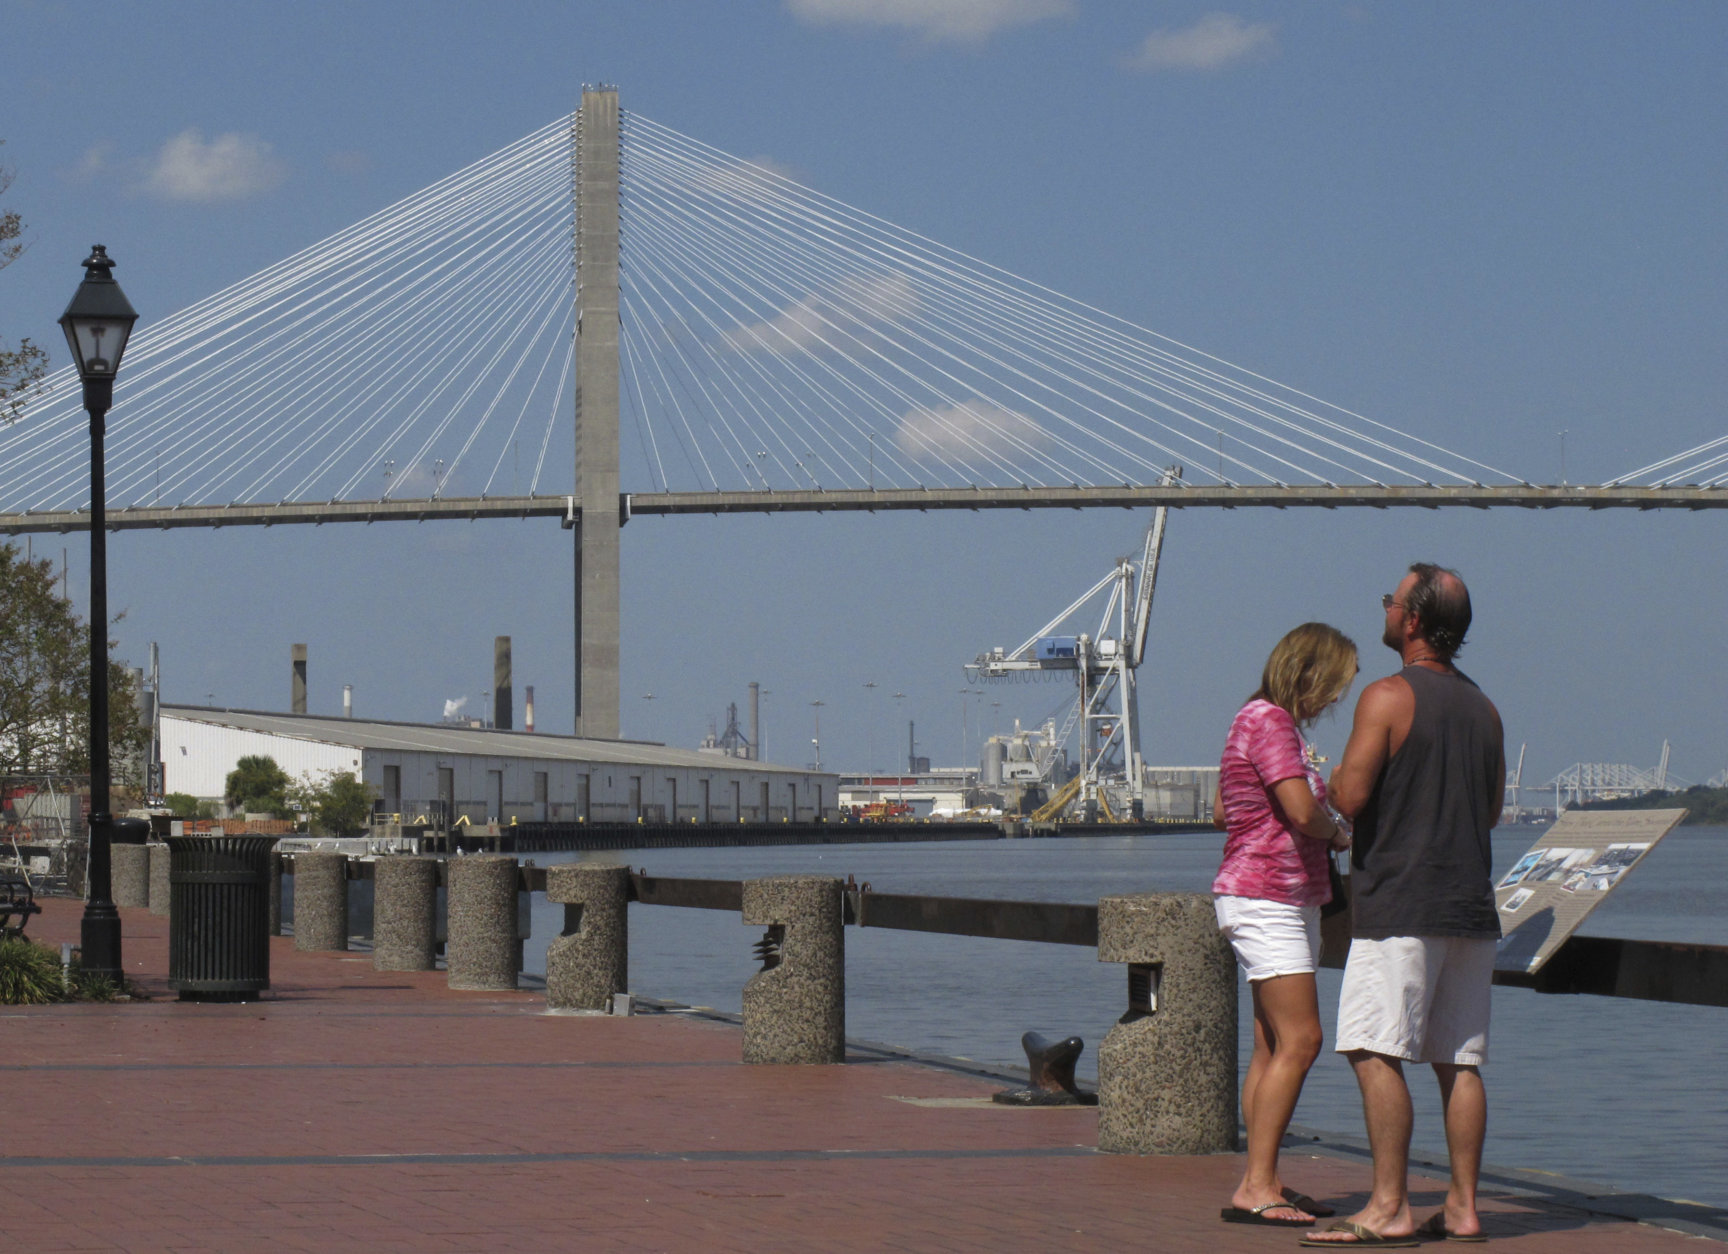 FILE - This Sept. 28, 2017 file photo shows the Eugene Talmadge Memorial Bridge over the Savannah river, in Savannah, Ga.  The Girl Scouts have hired a lobbyist, met with the governor and made plans for a milk-and-cookies reception for Georgia lawmakers as they try to get a Savannah bridge renamed for Girl Scouts founder Juliette Gordon Low.  Sue Else of the Girls Scouts of Historic Georgia says up to 300 scouts will visit the state Capitol in February 2018 to meet with lawmakers about the bridge.   (AP Photo/Russ Bynum)